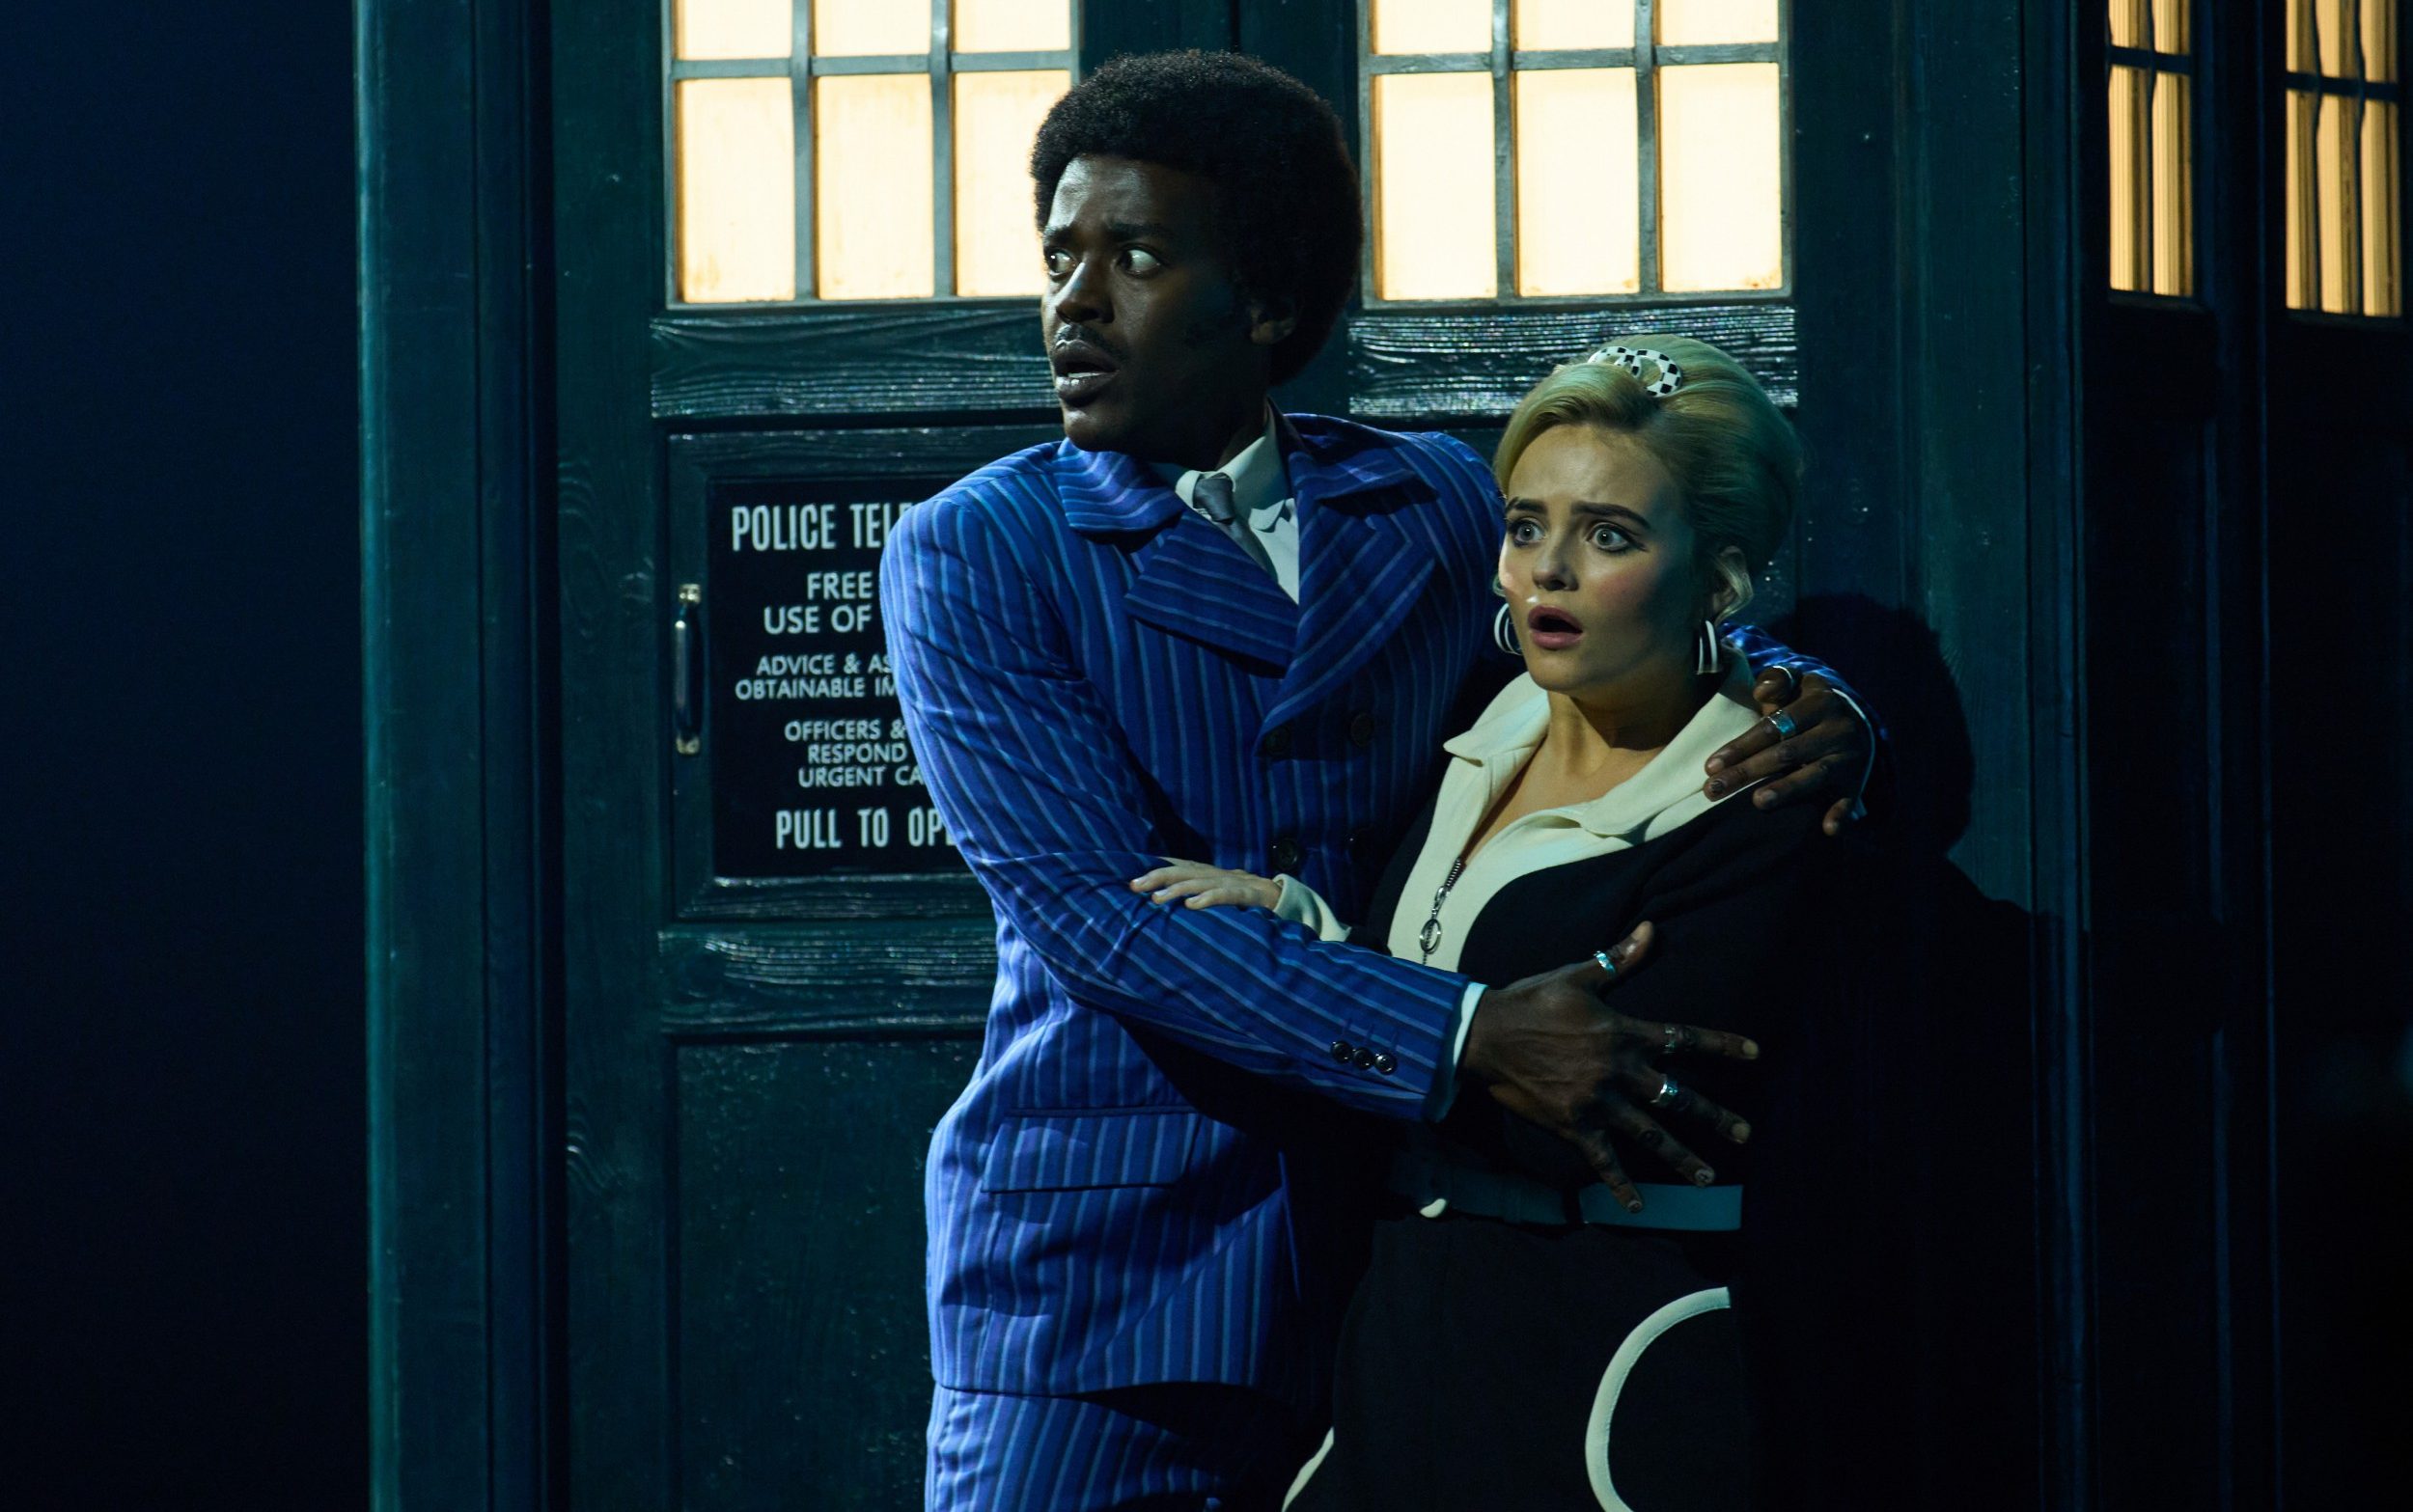 doctor who, series 14, review: ncuti gatwa shines among the clunky culture-war posturing (3*)